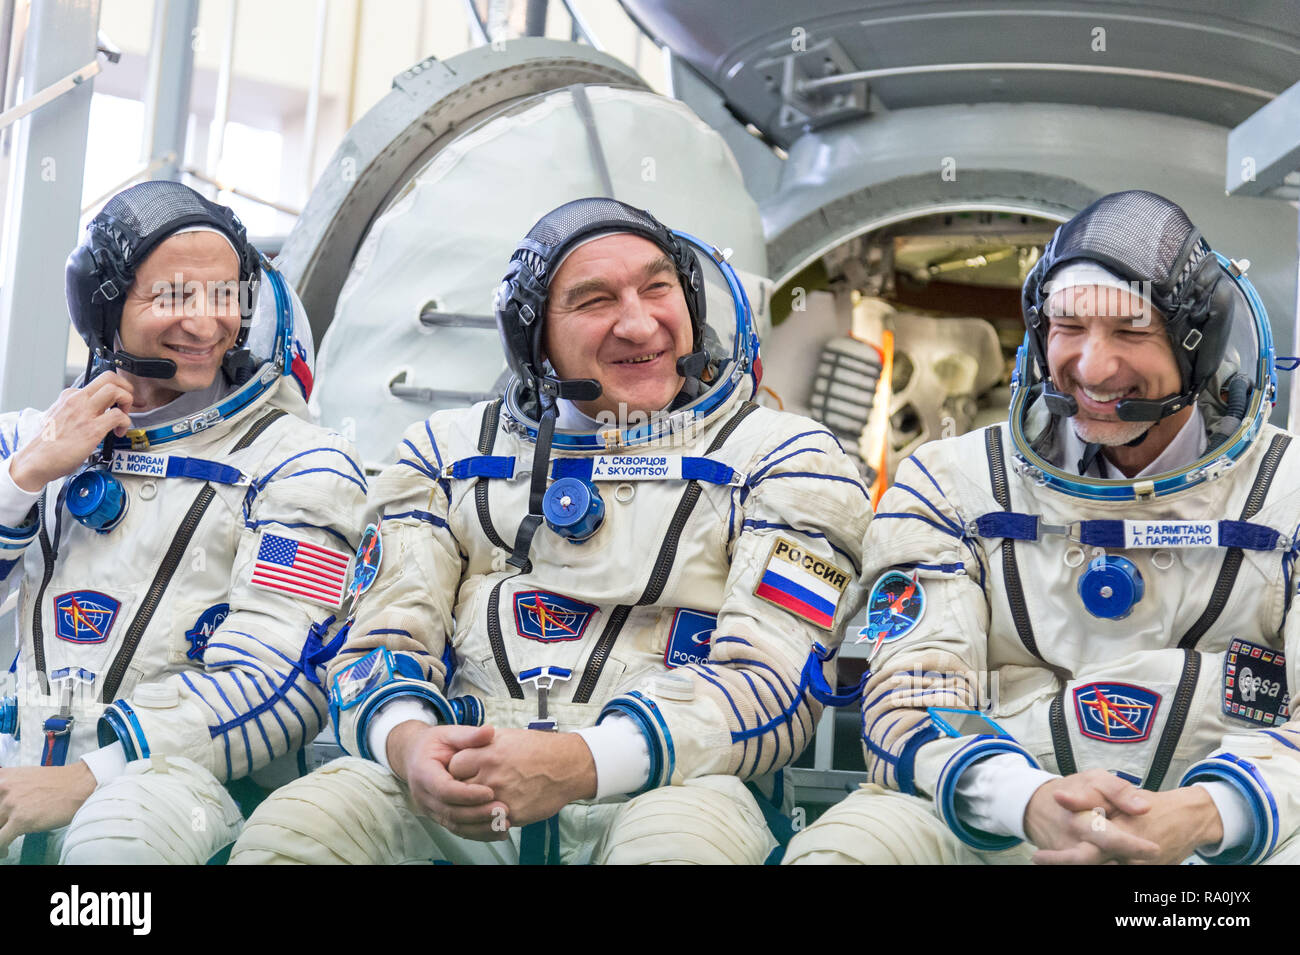 International Space Station Expedition 58 backup crew members Drew Morgan of NASA, left, Alexander Skvortsov of Roscosmos, center, and Luca Parmitano of the European Space Agency pose outside the Soyuz simulator at the Gagarin Cosmonaut Training Center November 13, 2018 in Star City, Russia. Stock Photo